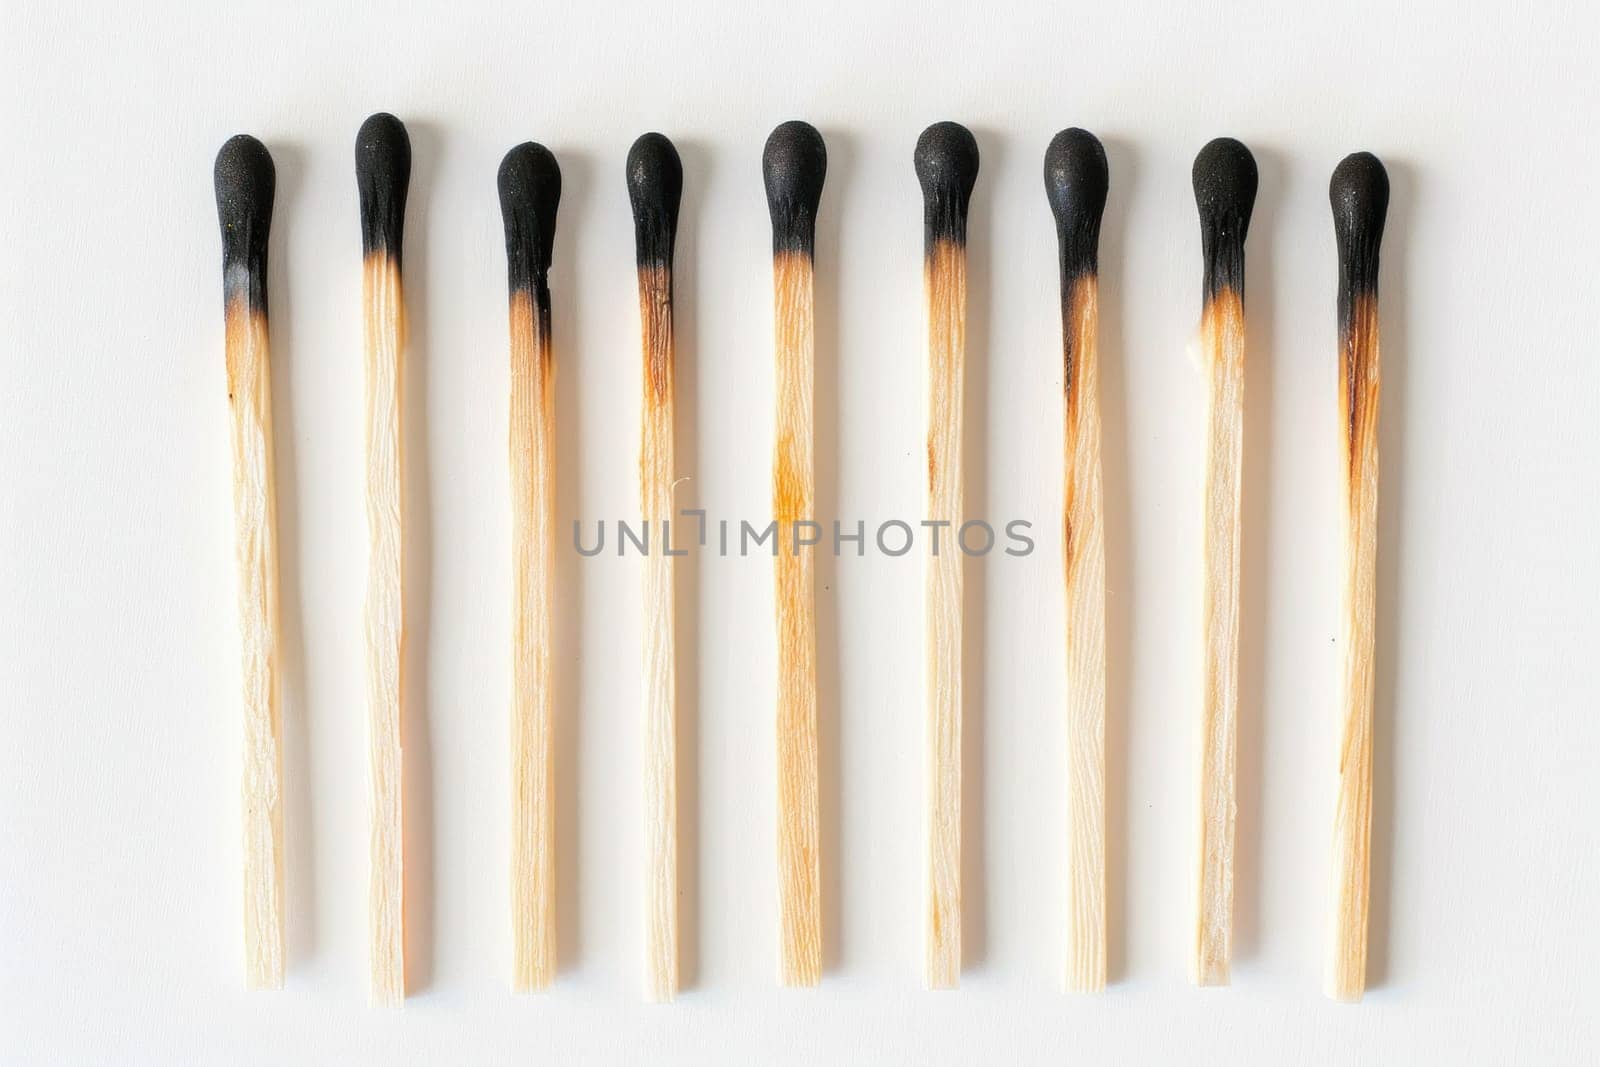 Row of matchsticks on white surface with one black matchstick in the middle creative art concept for business marketing campaign